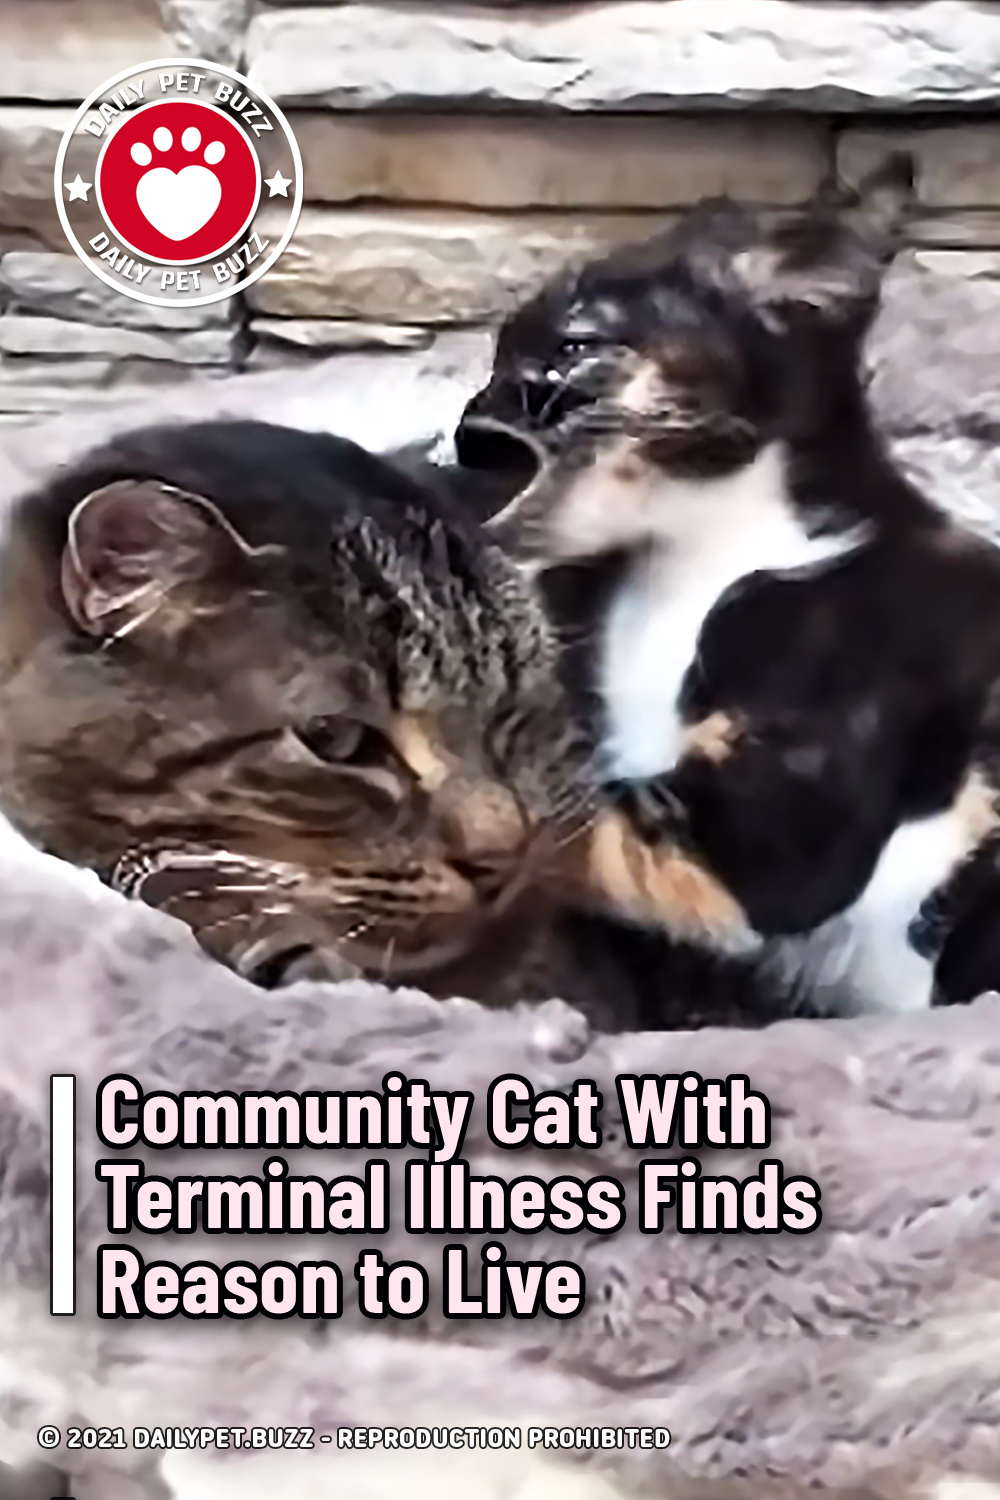 Community Cat With Terminal Illness Finds Reason to Live